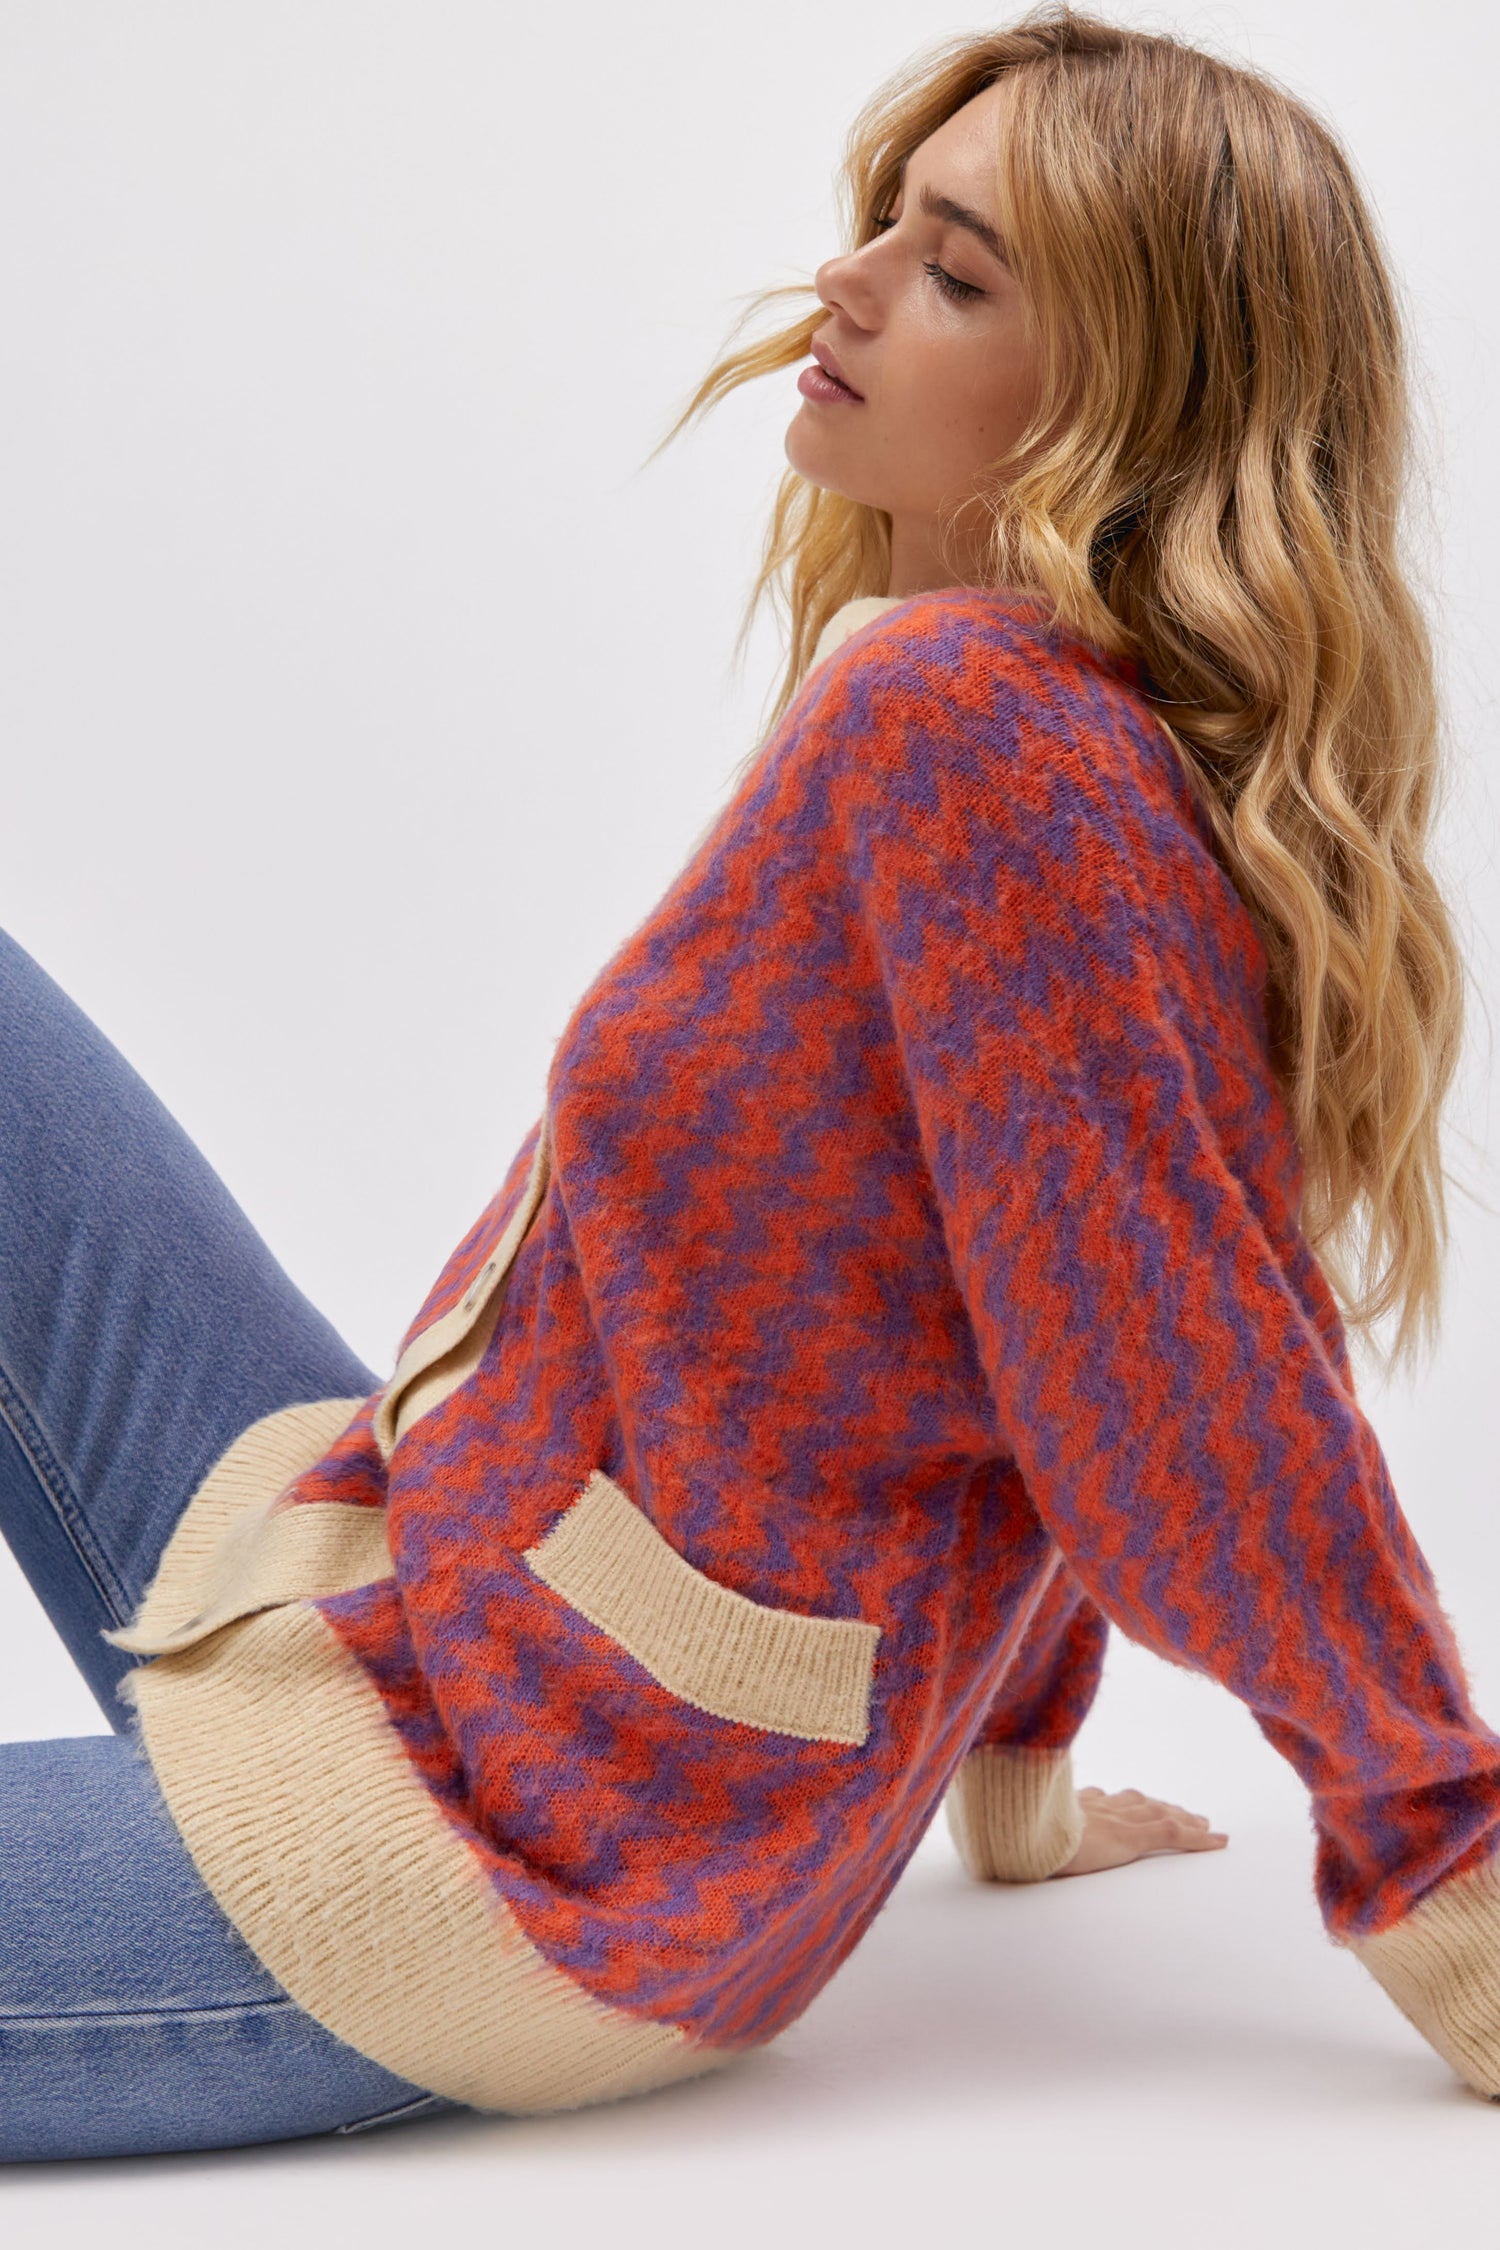 A blonde-haired model featuring a violet orange zig zag cardigan.